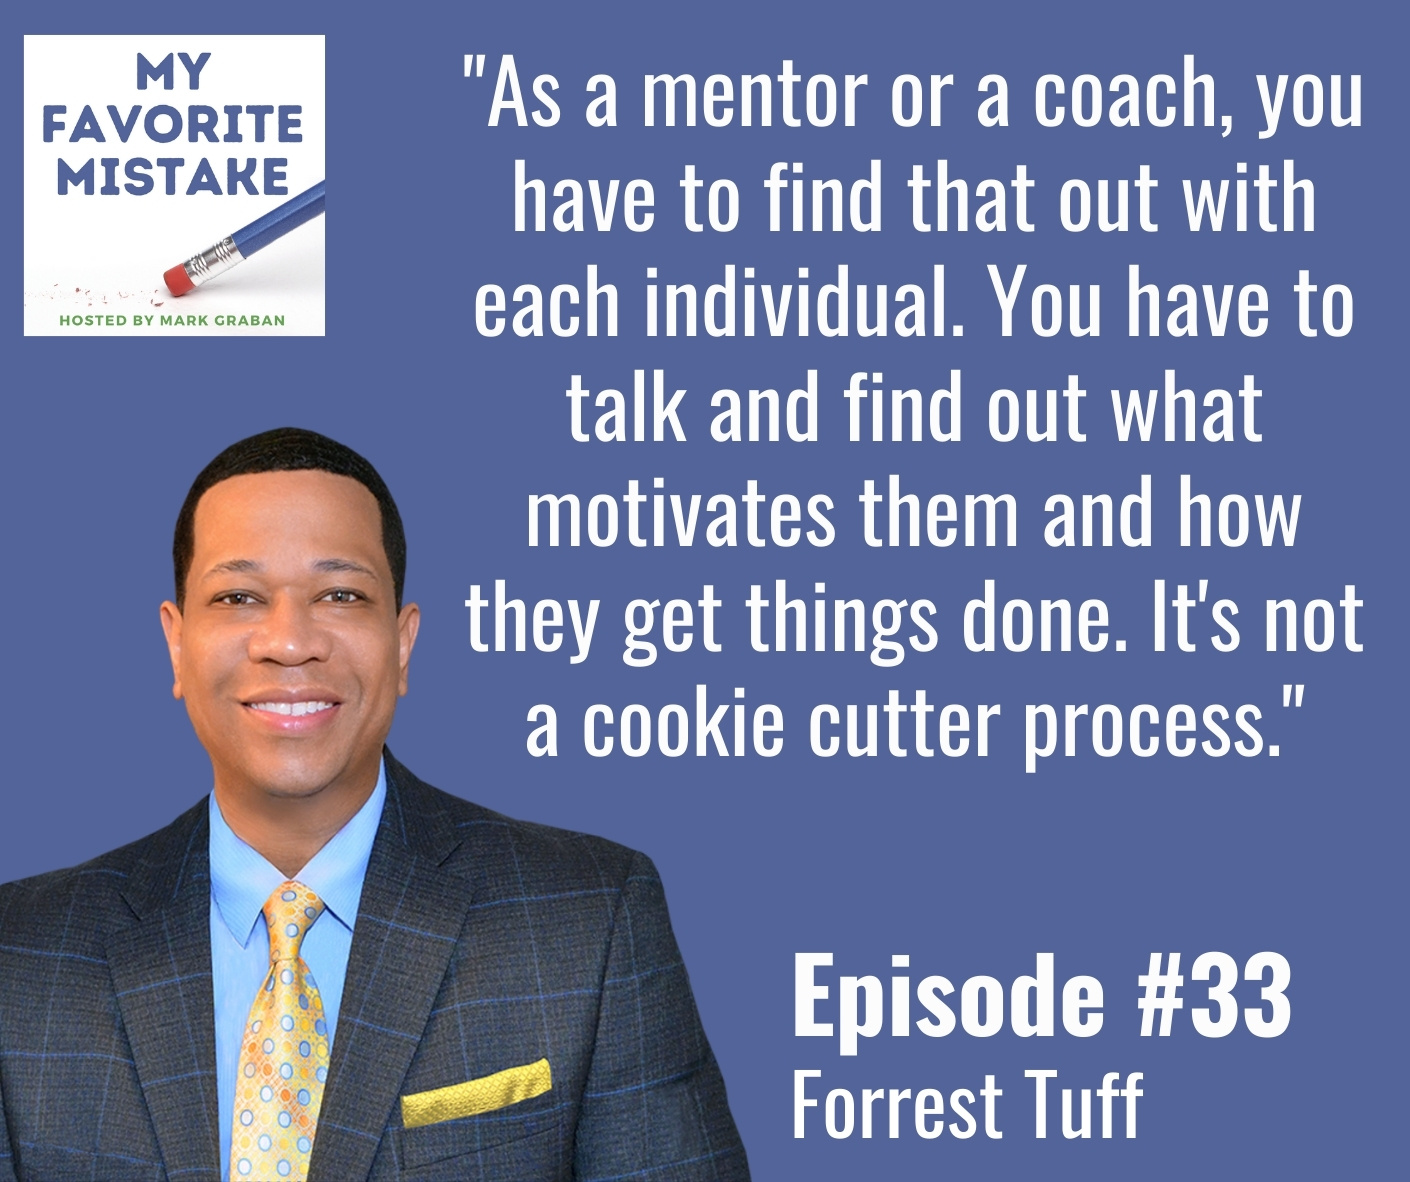 "As a mentor or a coach, you have to find that out with each individual. You have to talk and find out what motivates them and how they get things done. It's not a cookie cutter process."